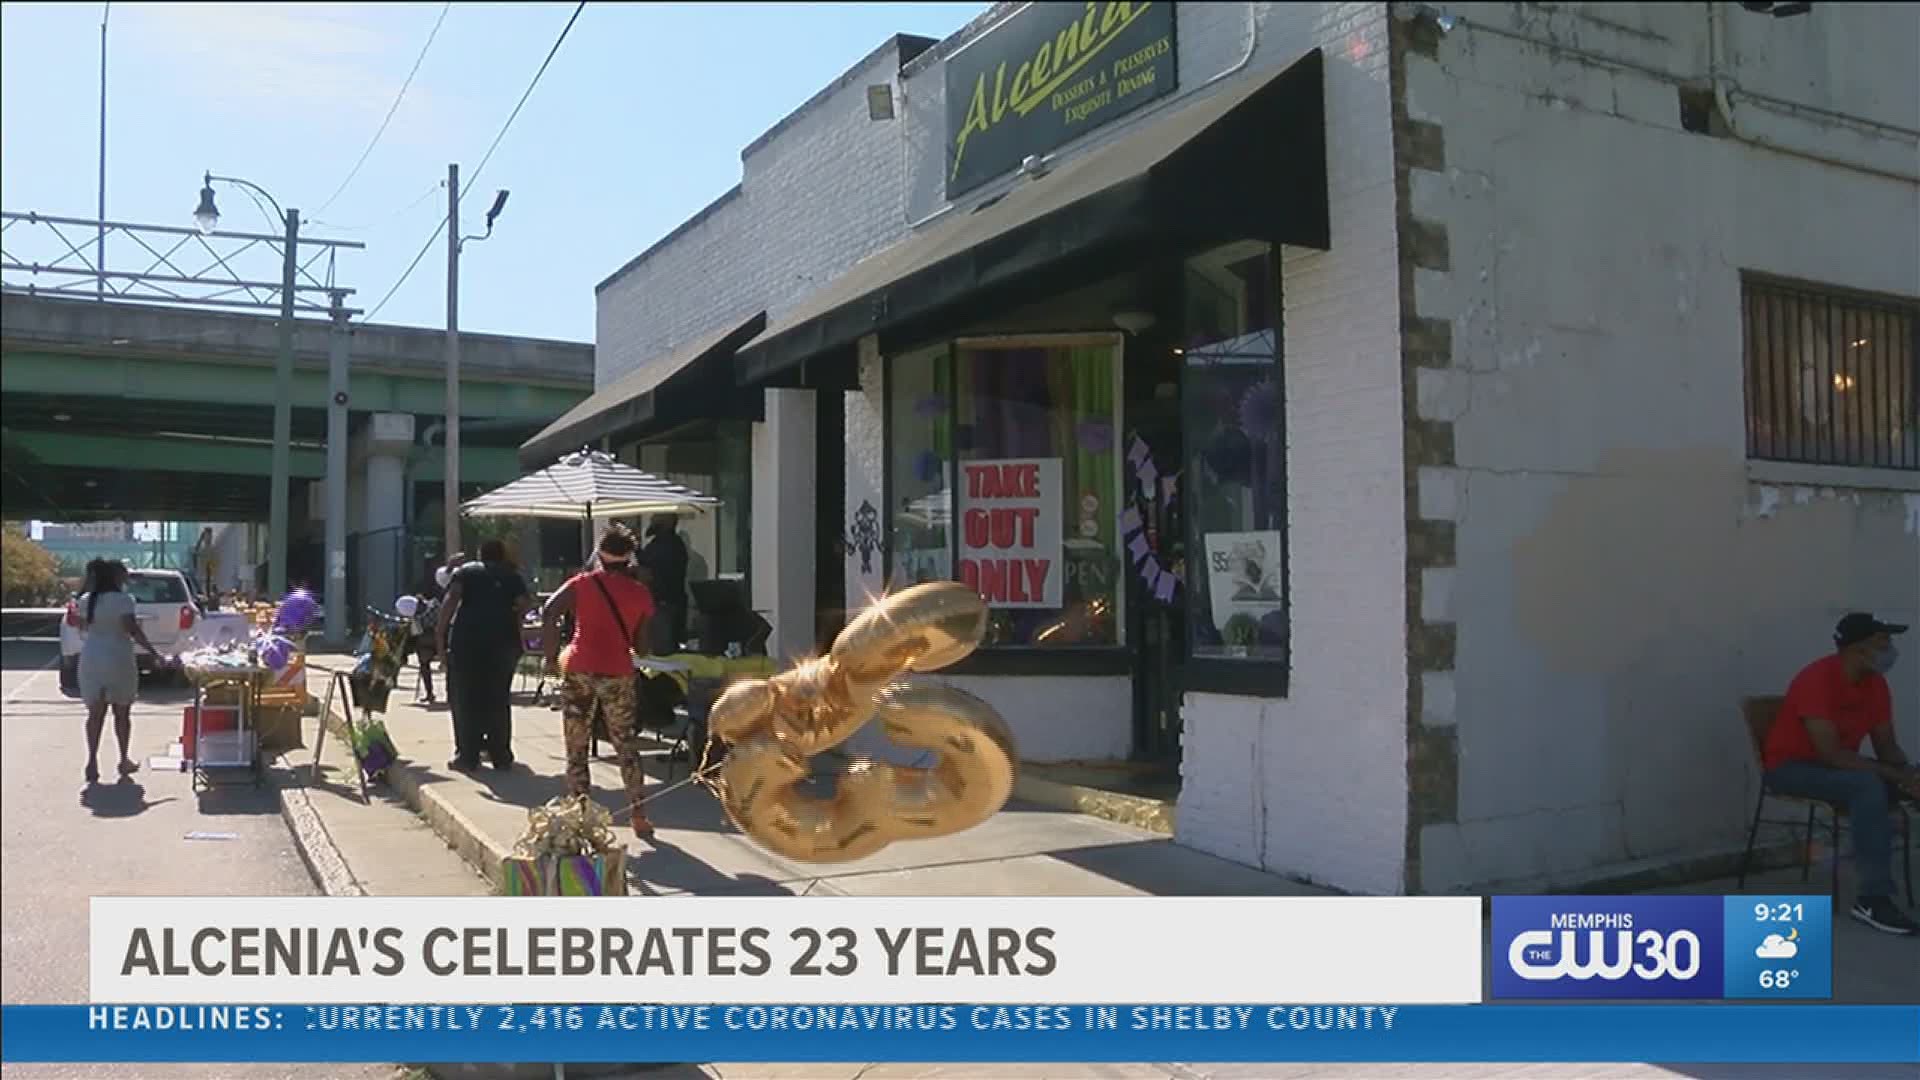 Alcenia's celebrates 23 years of great southern hospitality and delicious soul food.